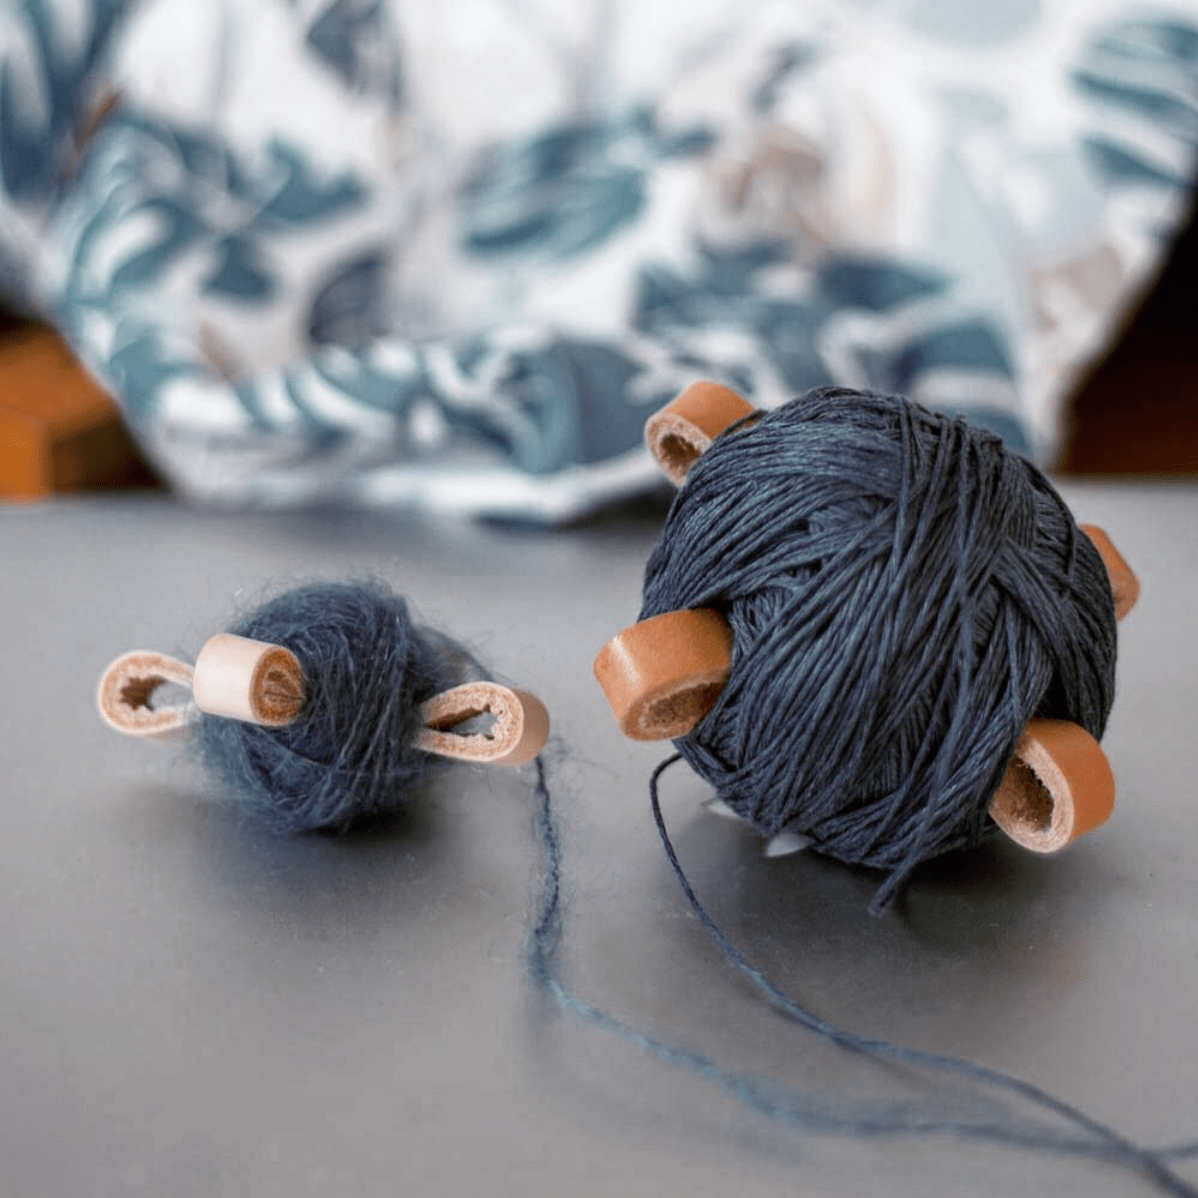 Merchant and Mills Pin Magnet - Yarn for the Soul